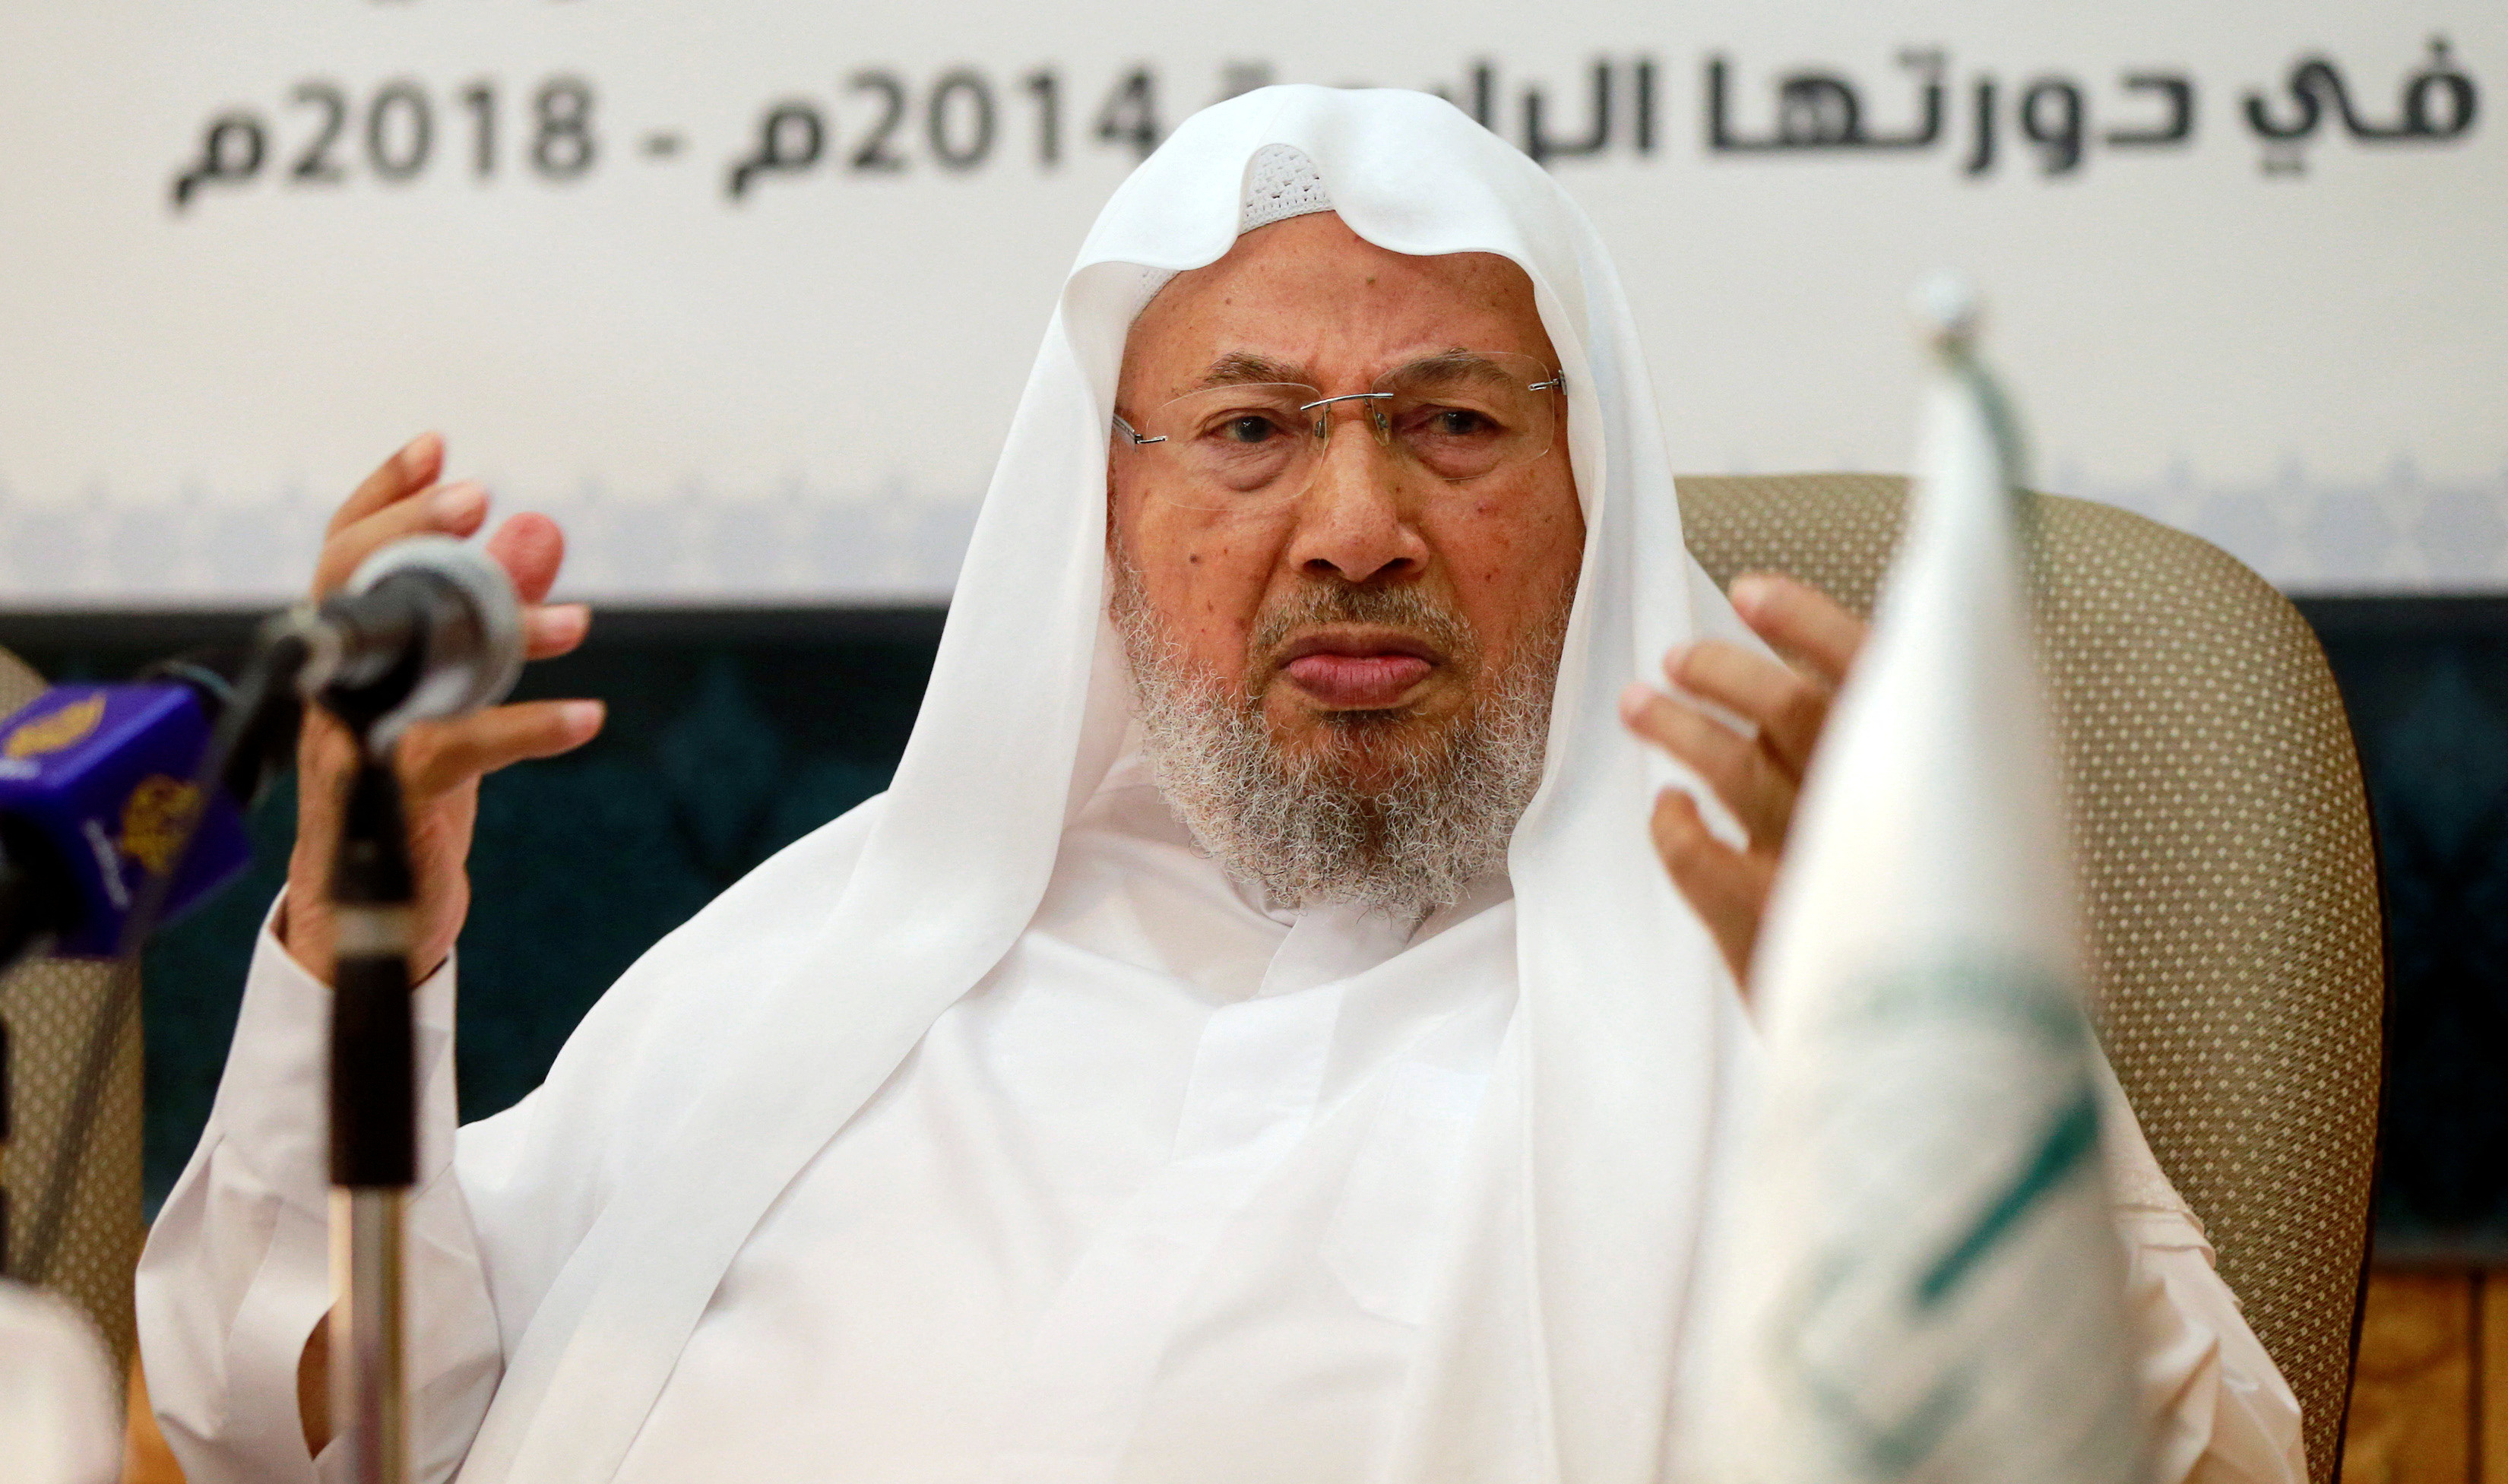 Chairman of the International Union of Muslim Scholars Youssef al-Qaradawi speaks during a news conference in Doha